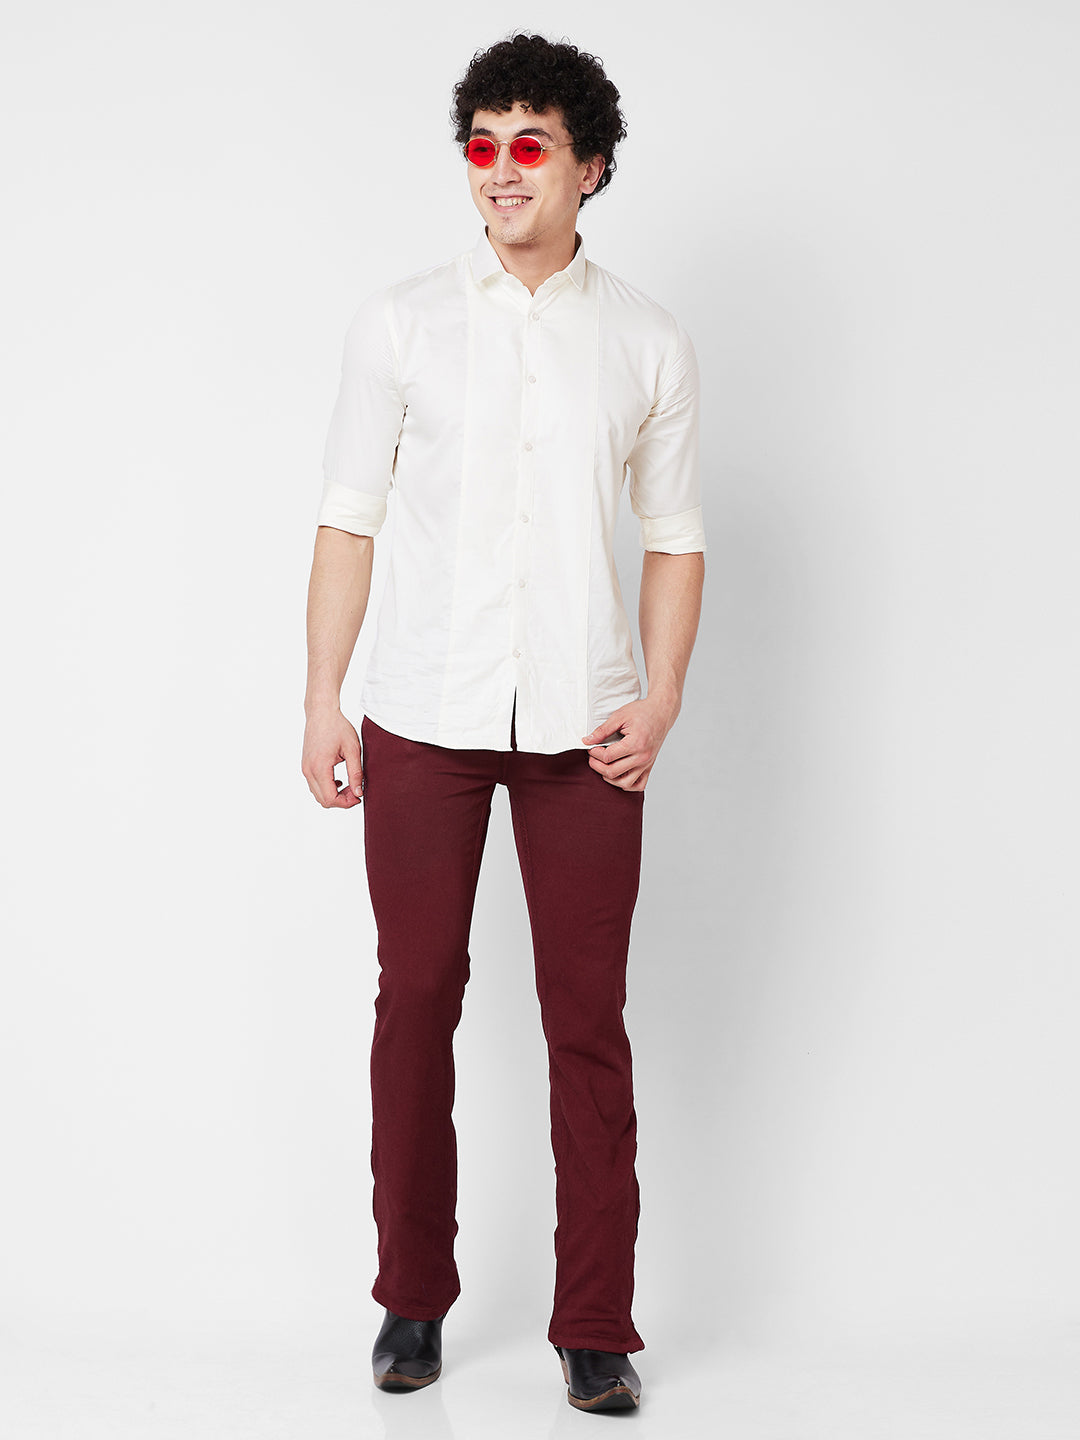 Maroon Boot-cut Jeans With Zipper Bottom For Mens